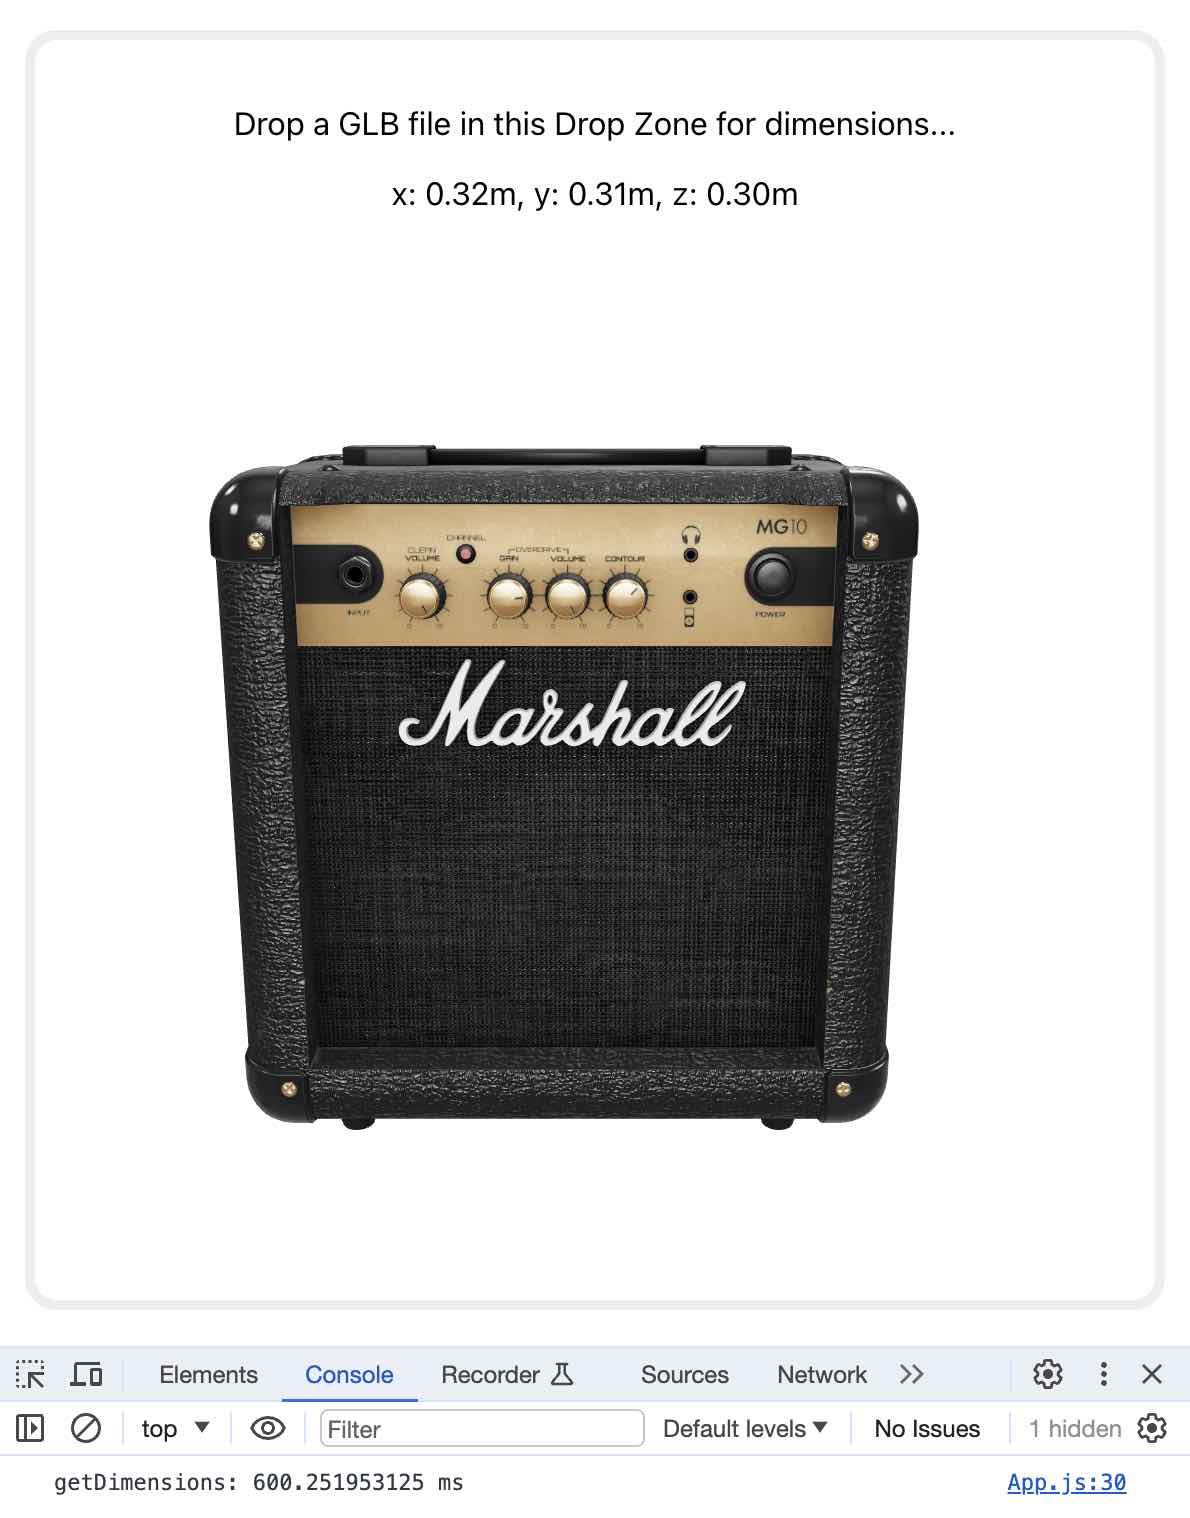 Screenshot of prototype showing a Marshall amp model loaded in the UI with dimensions displayed and the timing results shown in Dev Tools.